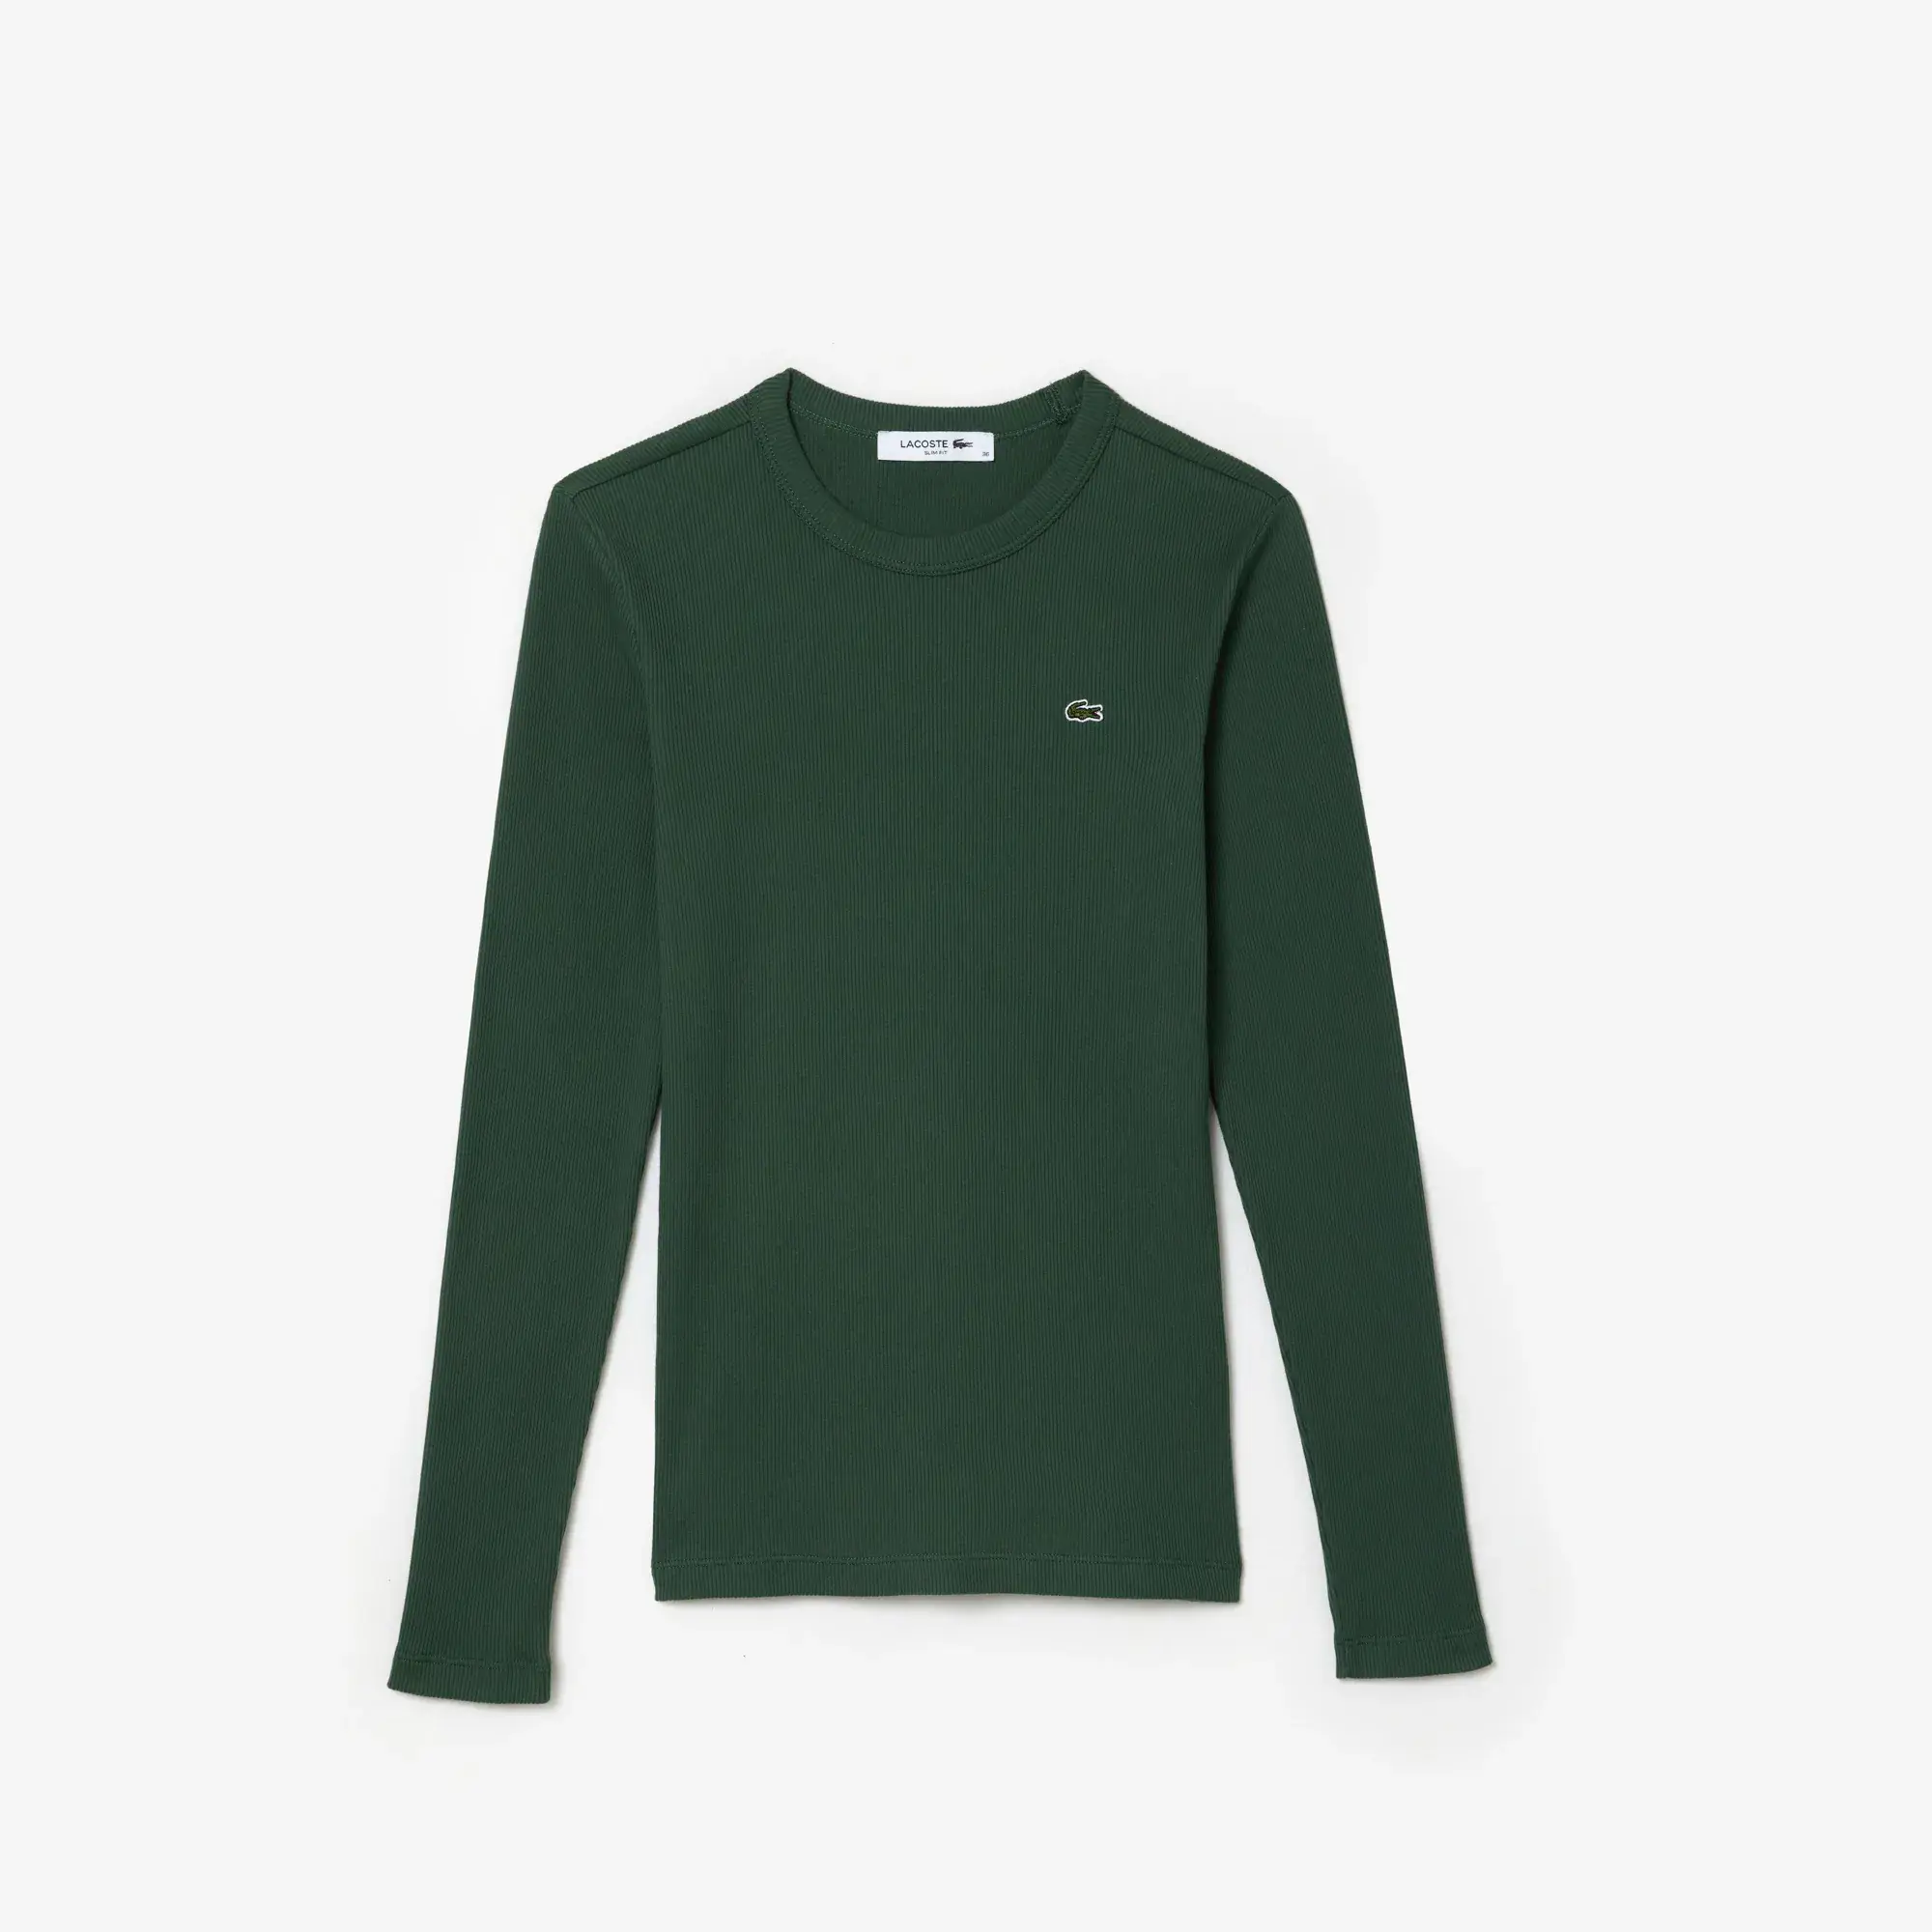 Lacoste Women's Long Sleeve Ribbed Cotton T-Shirt. 2